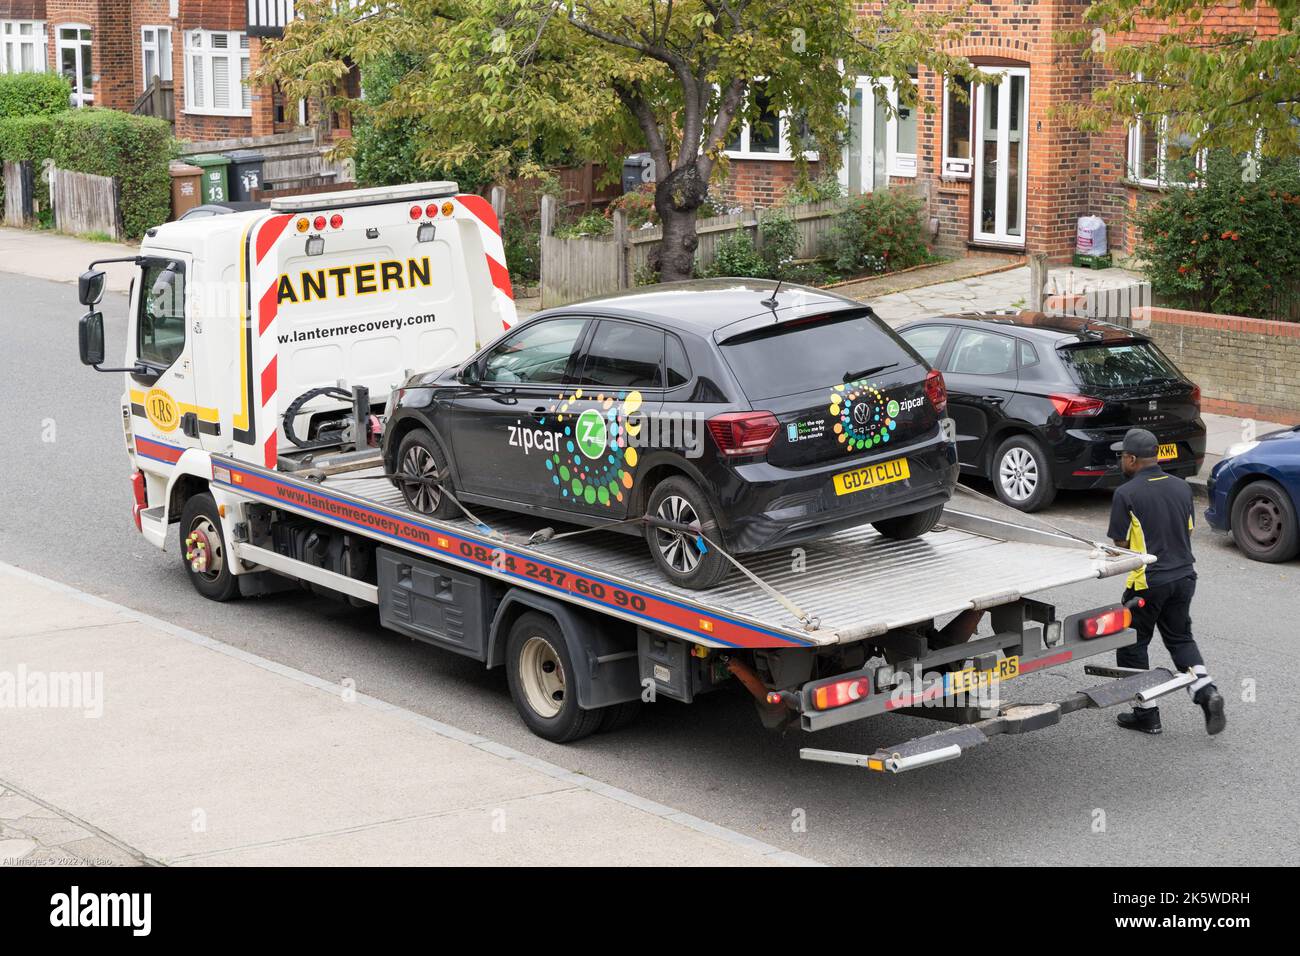 break-down zipcar car is hoisted onto a loading ramp and secured on a recovery lorry from LANTERN London England Europe Stock Photo